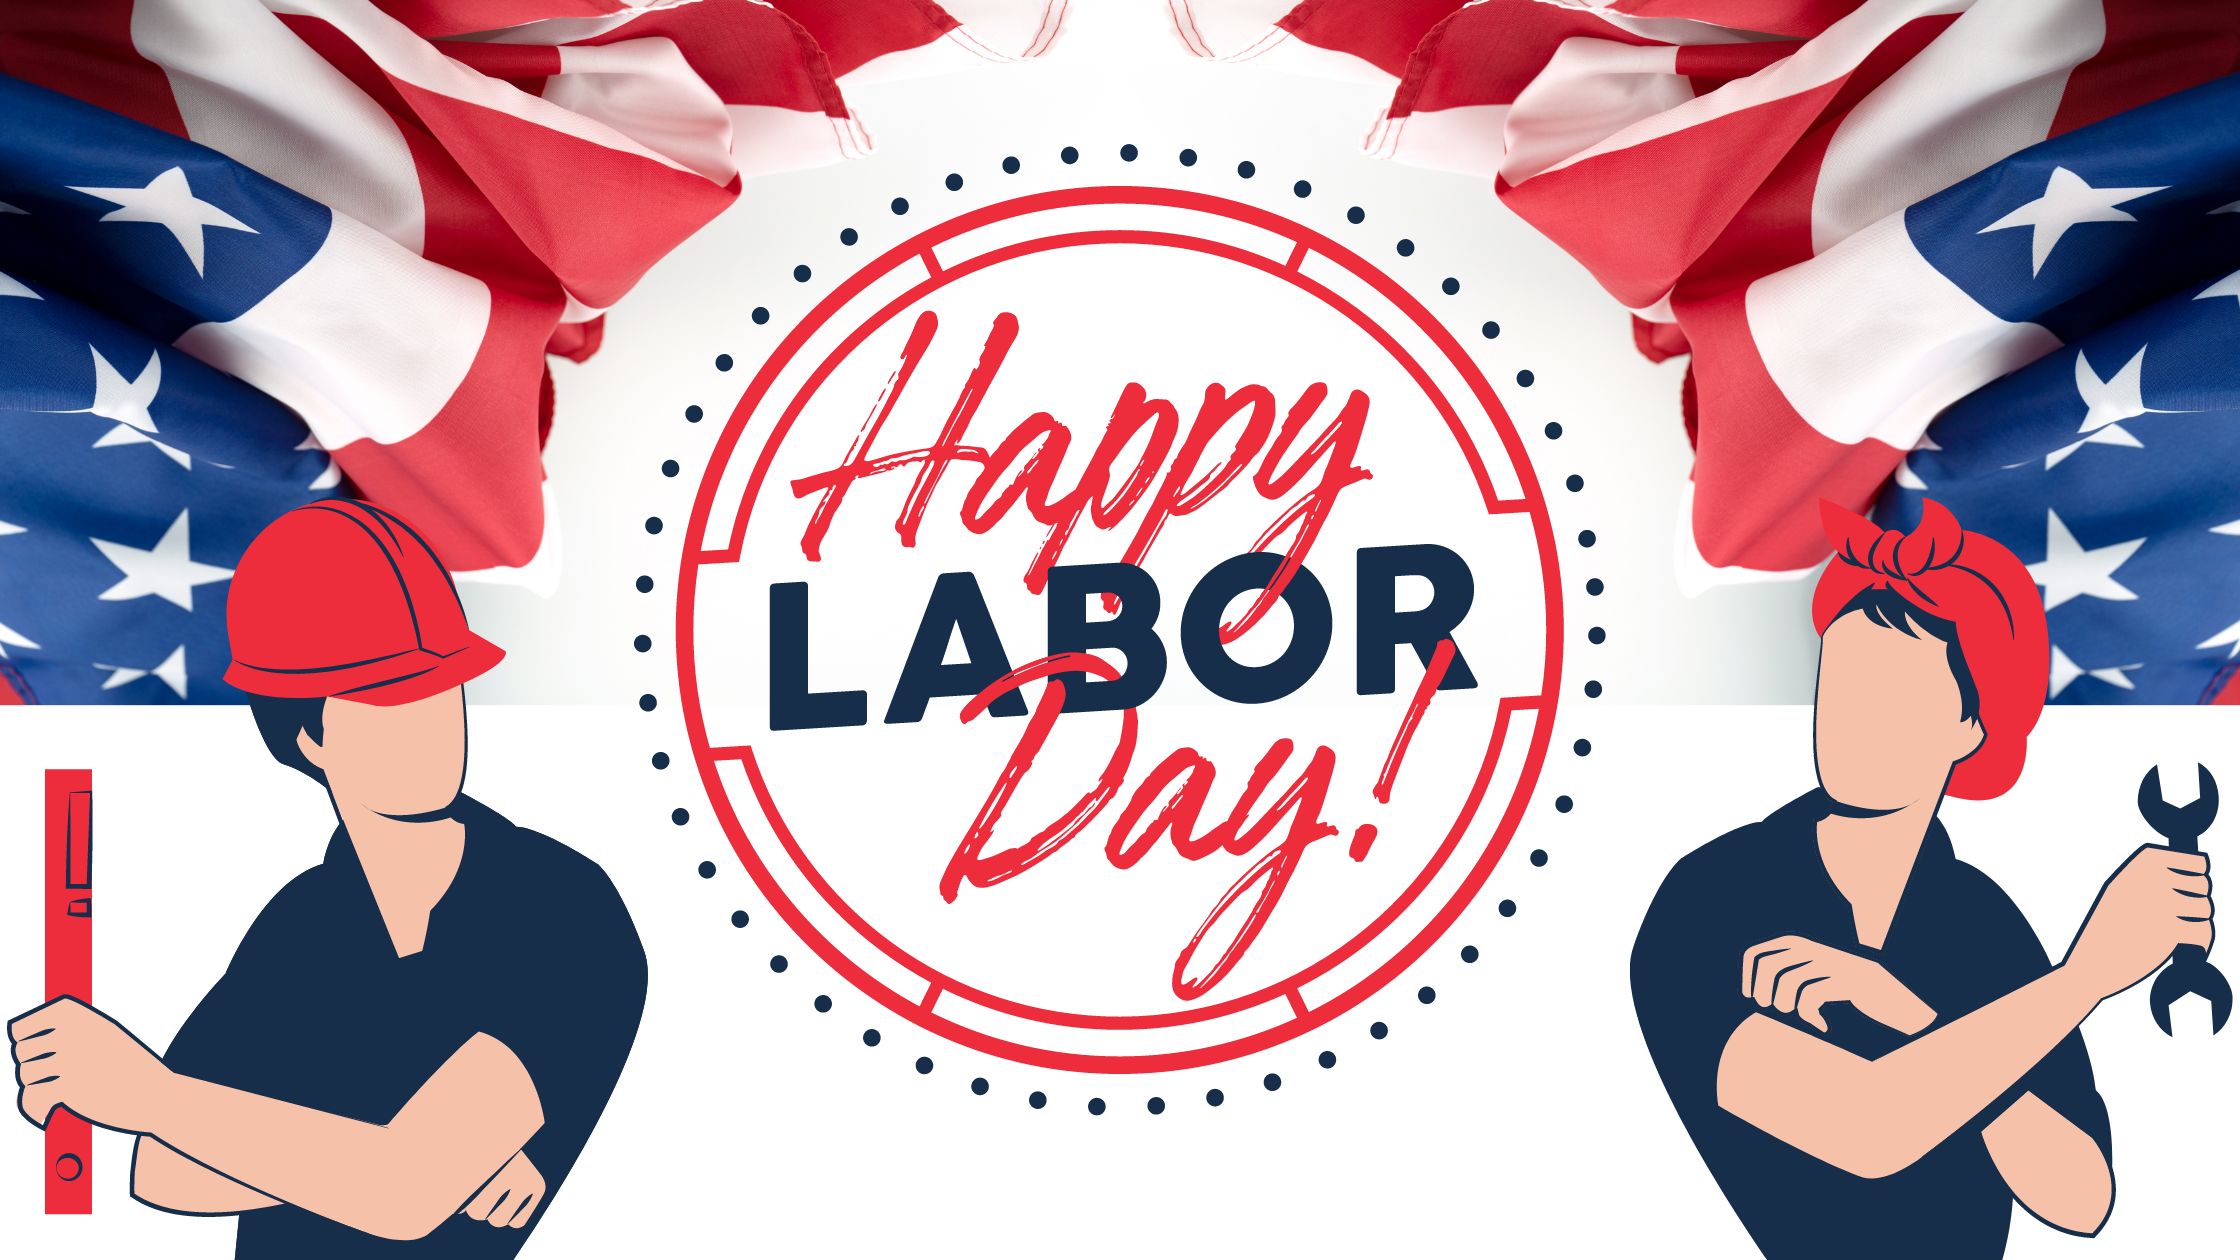 Happy Labor Day from SEPCO